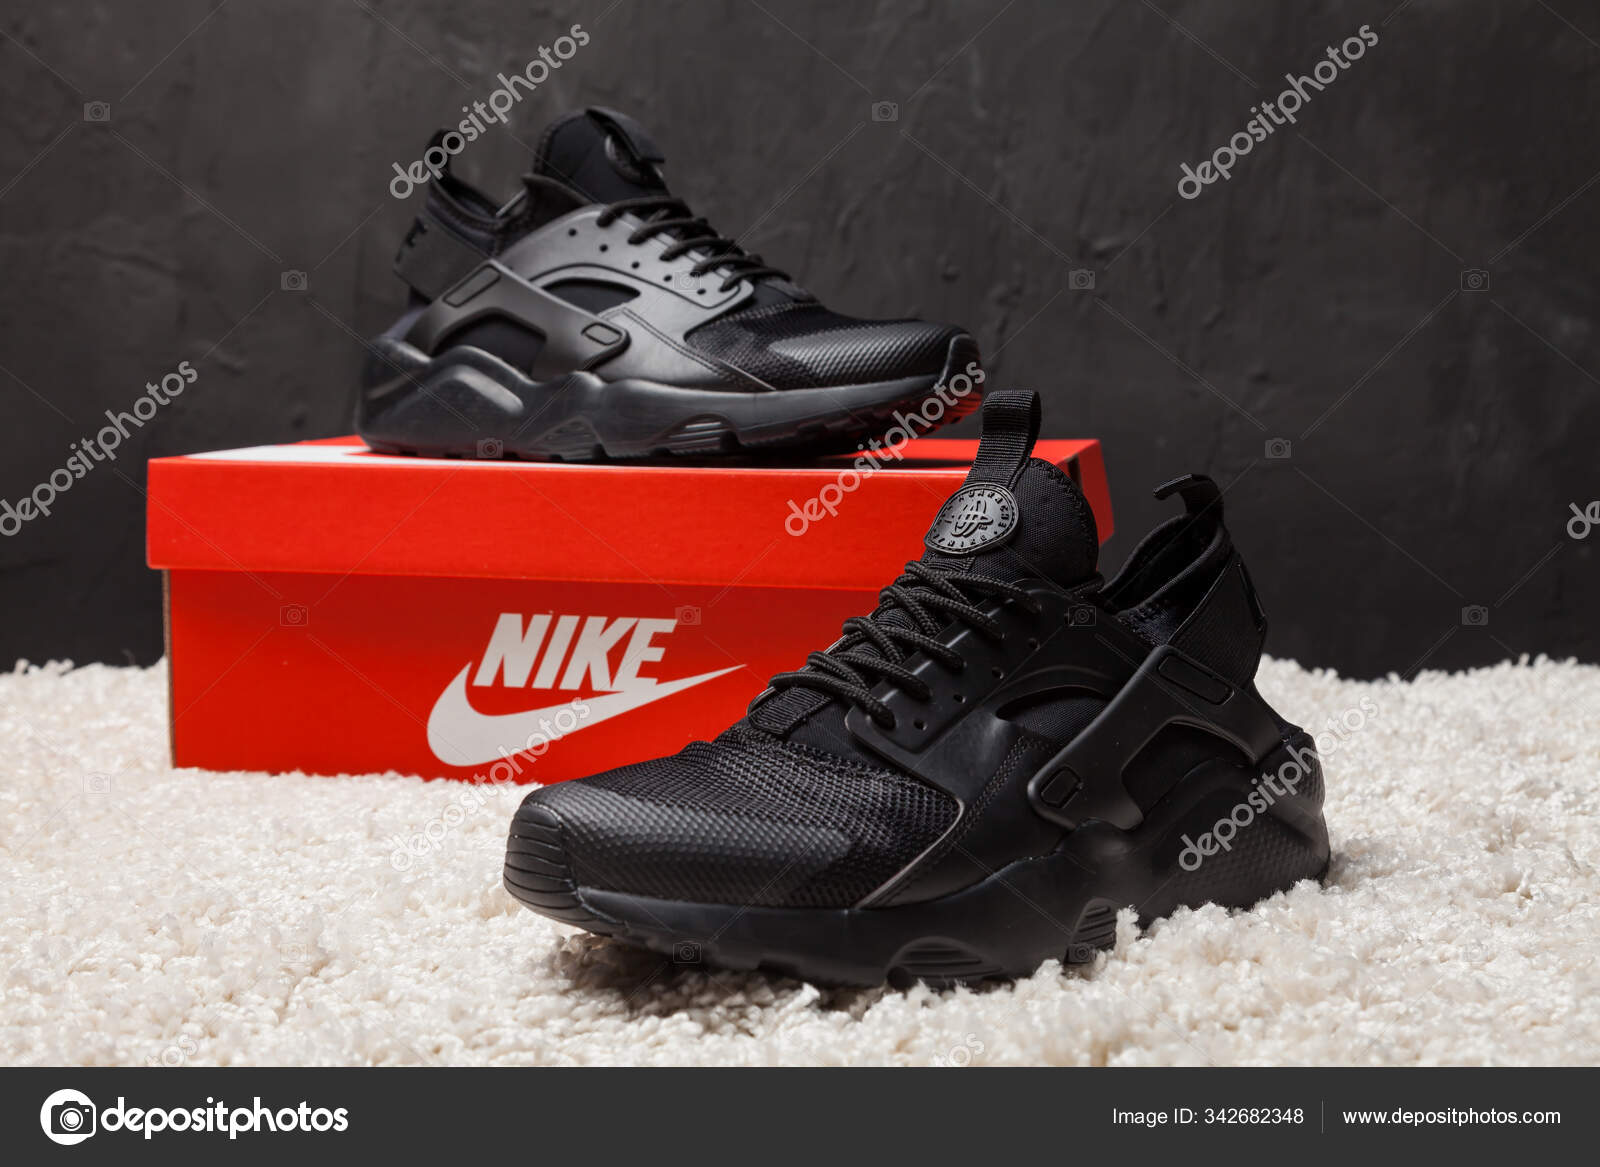 Knogle Gør gulvet rent investering New Beautiful Colorful Nice Nike Huarache Running Shoes Sneakers Trainers –  Stock Editorial Photo © sozon #342682348